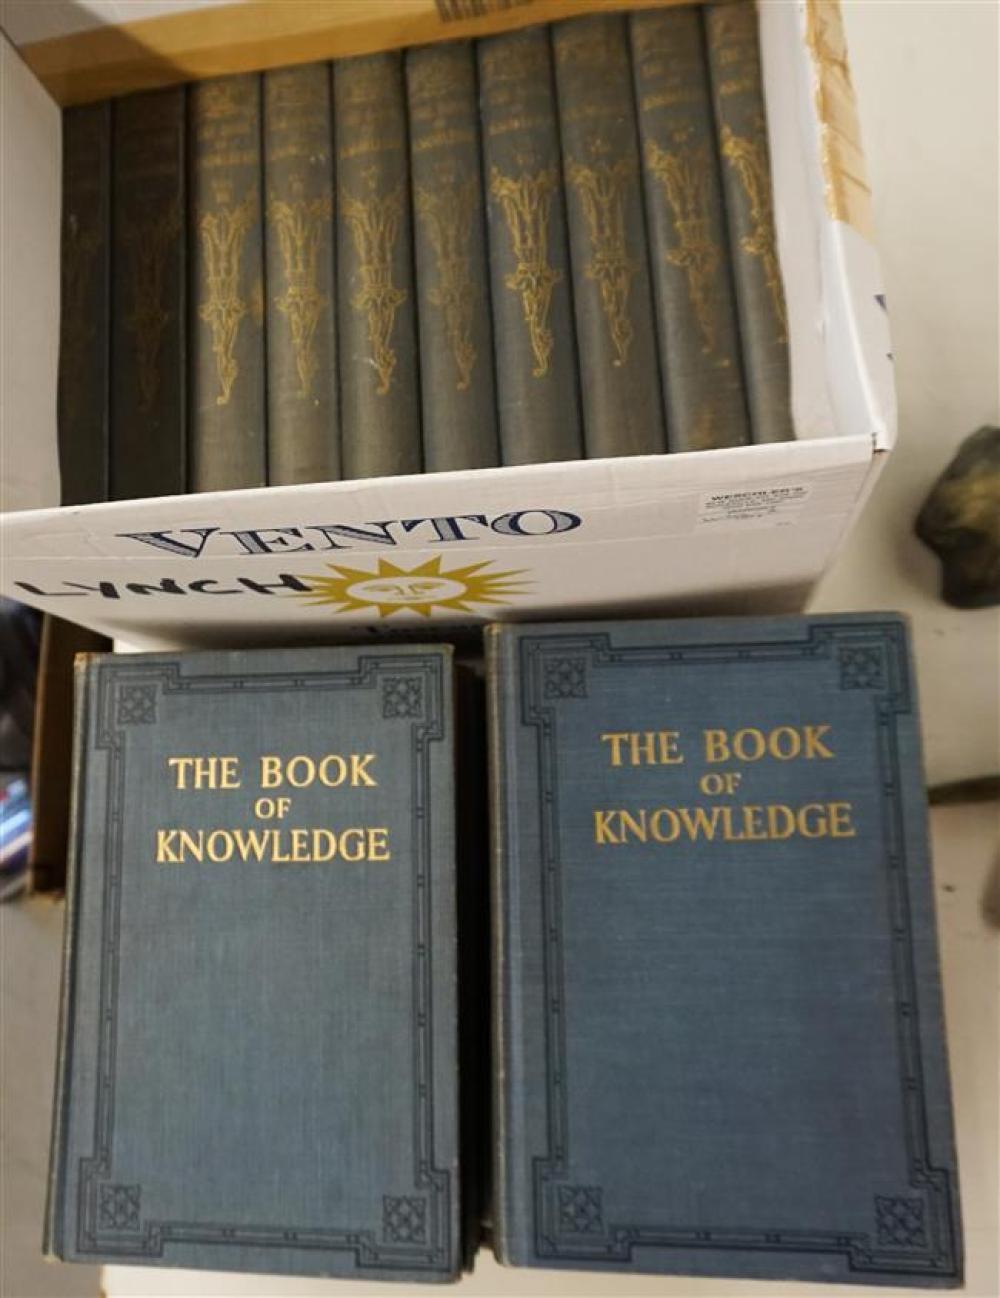 THE BOOK OF KNOWLEDGE 20 VOLUME SETThe